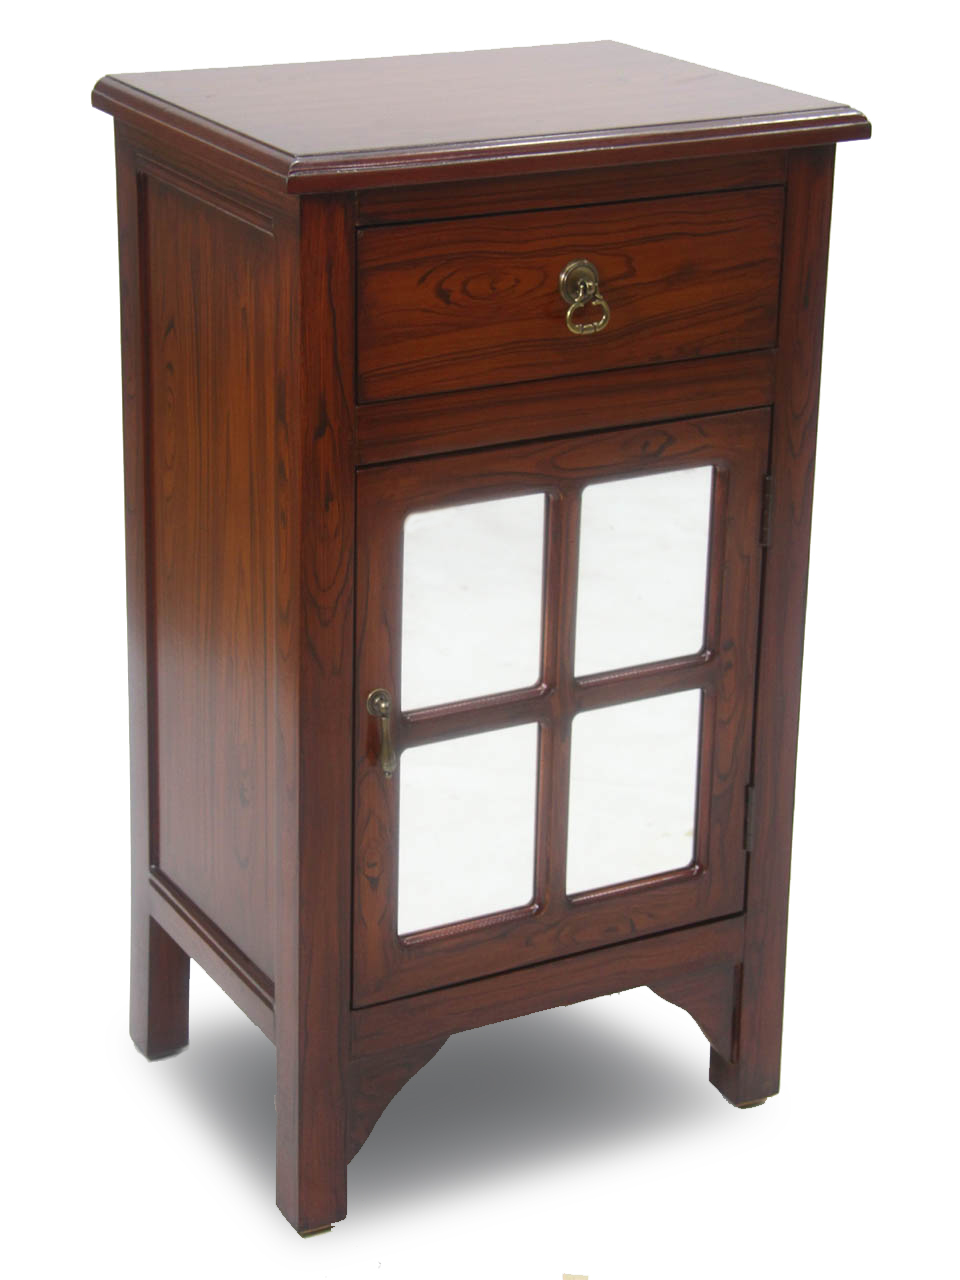 18" X 13" X 30" Mahogany Veneer MDF Wood Mirrored Glass Cabinet with a Drawer and a Door